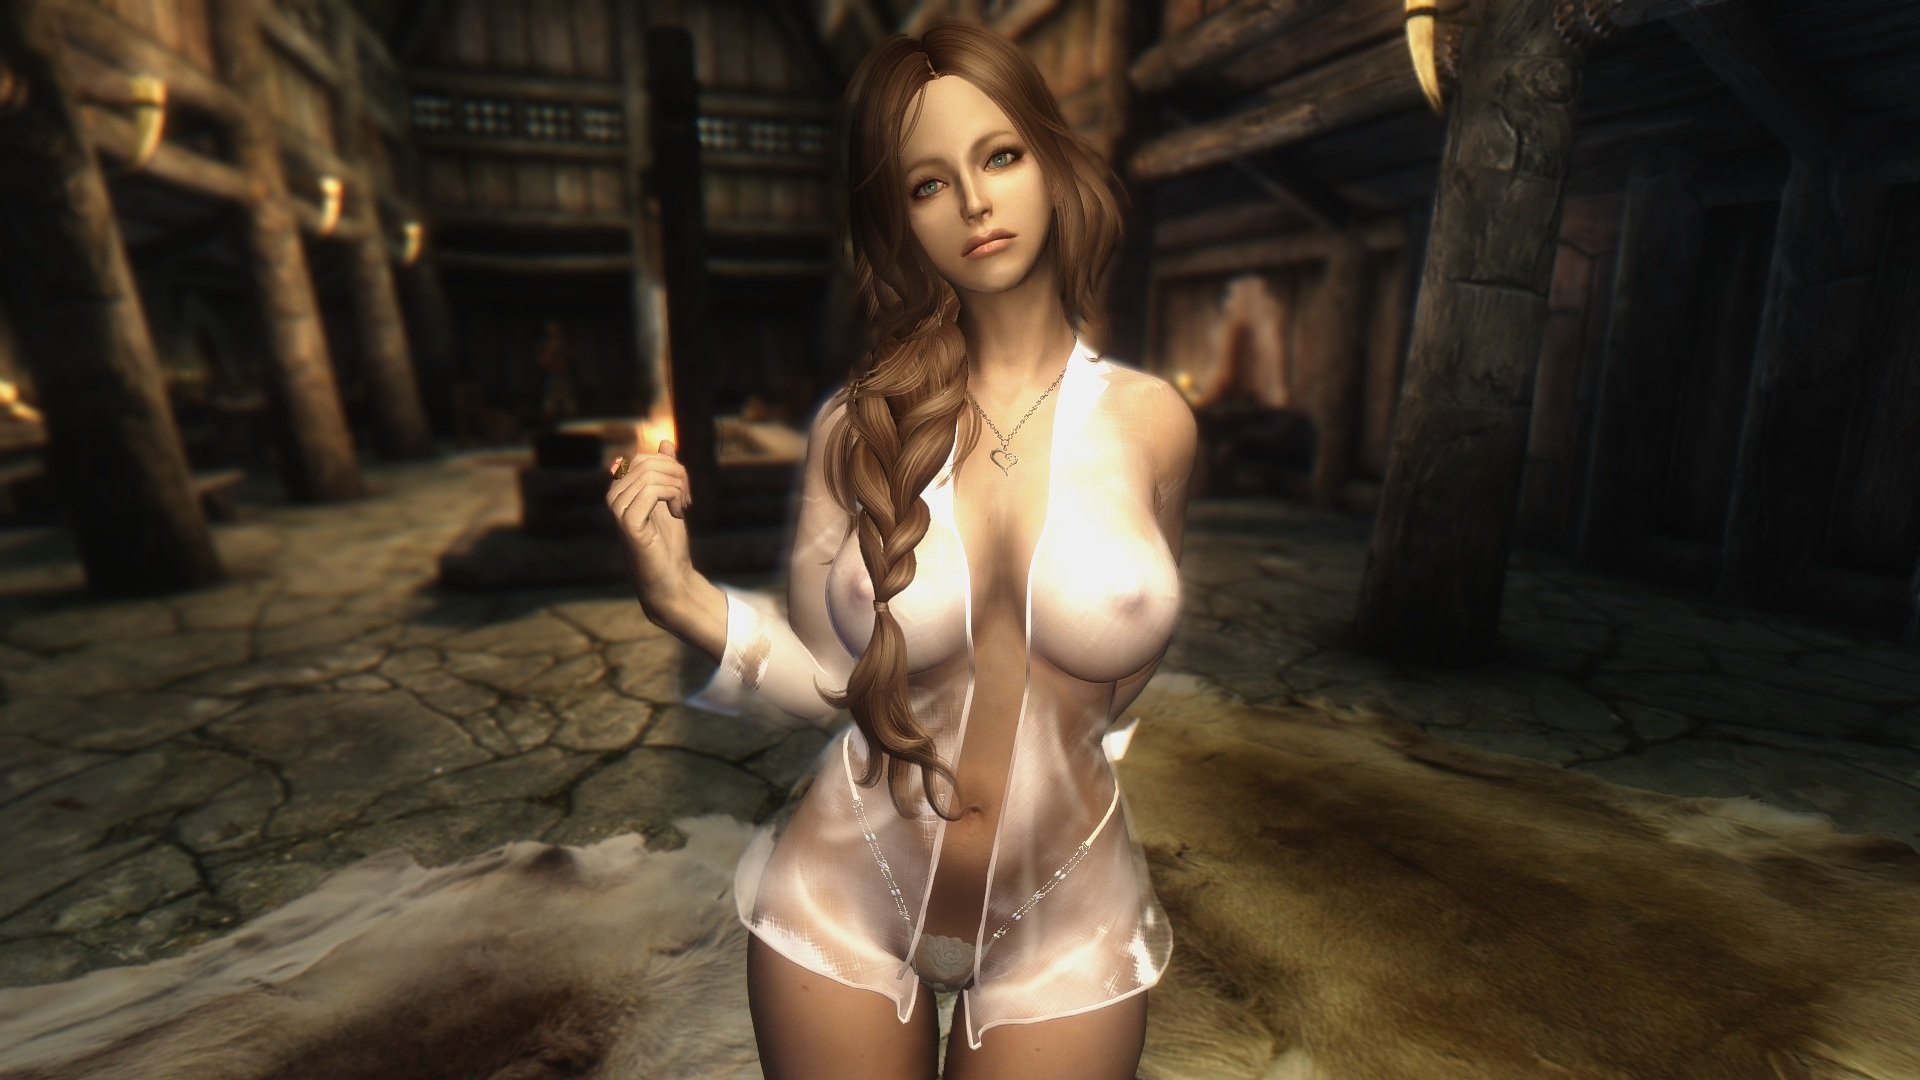 Sexy nude girl pics game characters